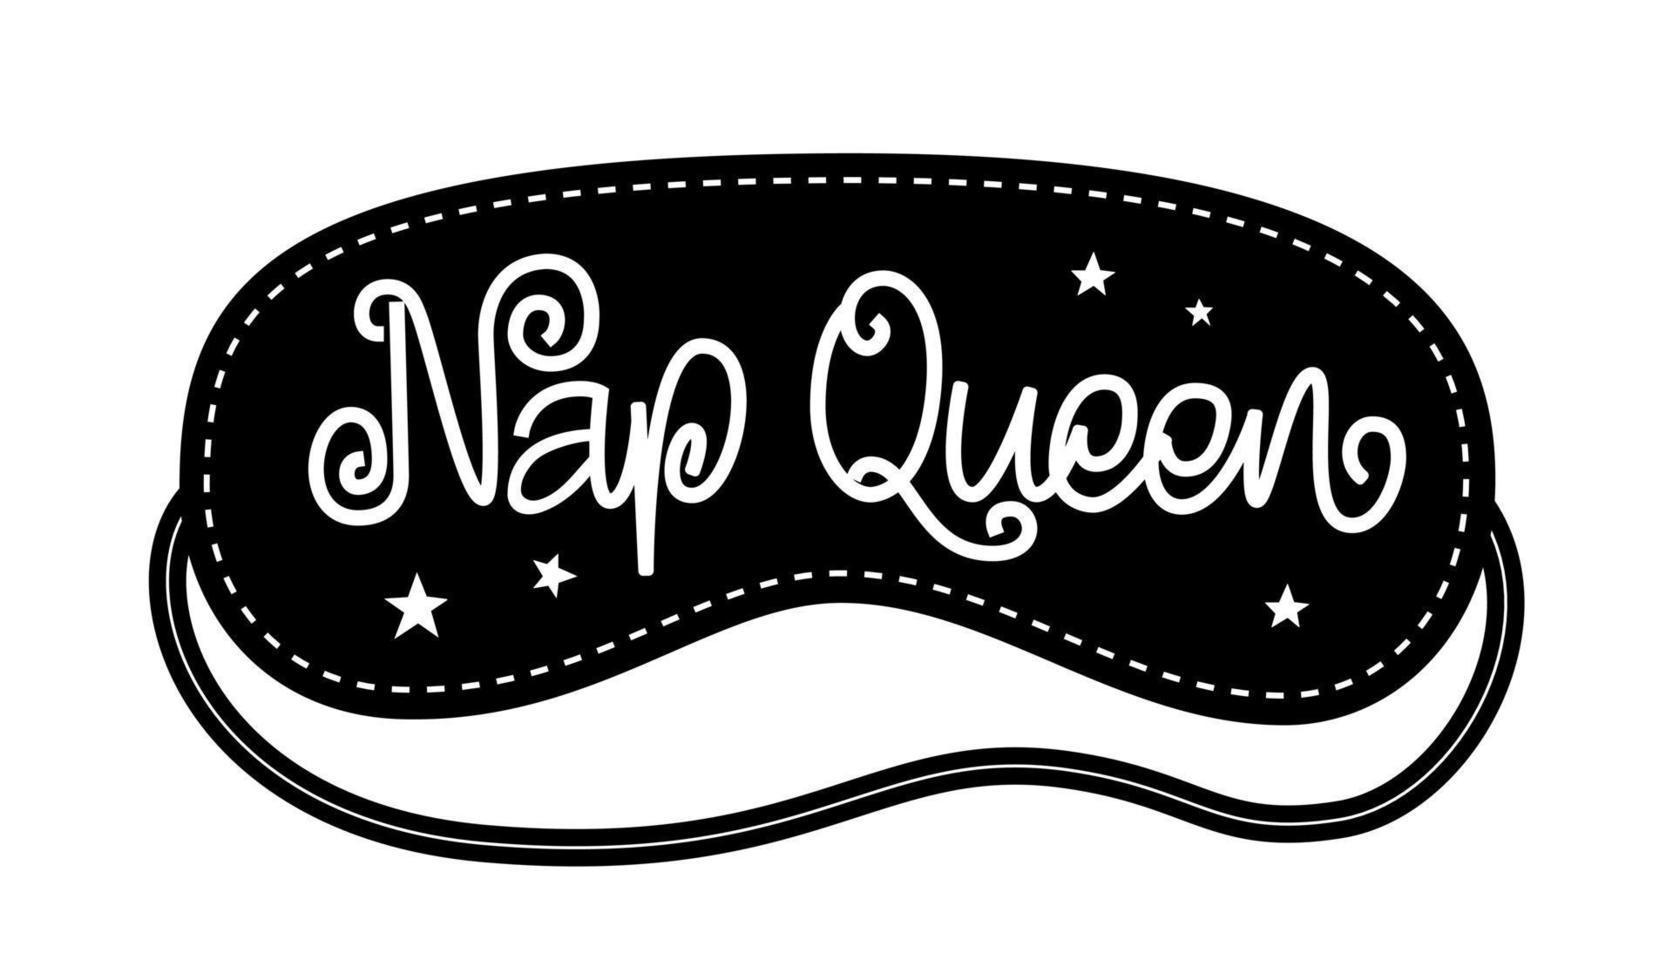 Nap queen hand lettering quote with flourishes and sleep mask illustration. vector